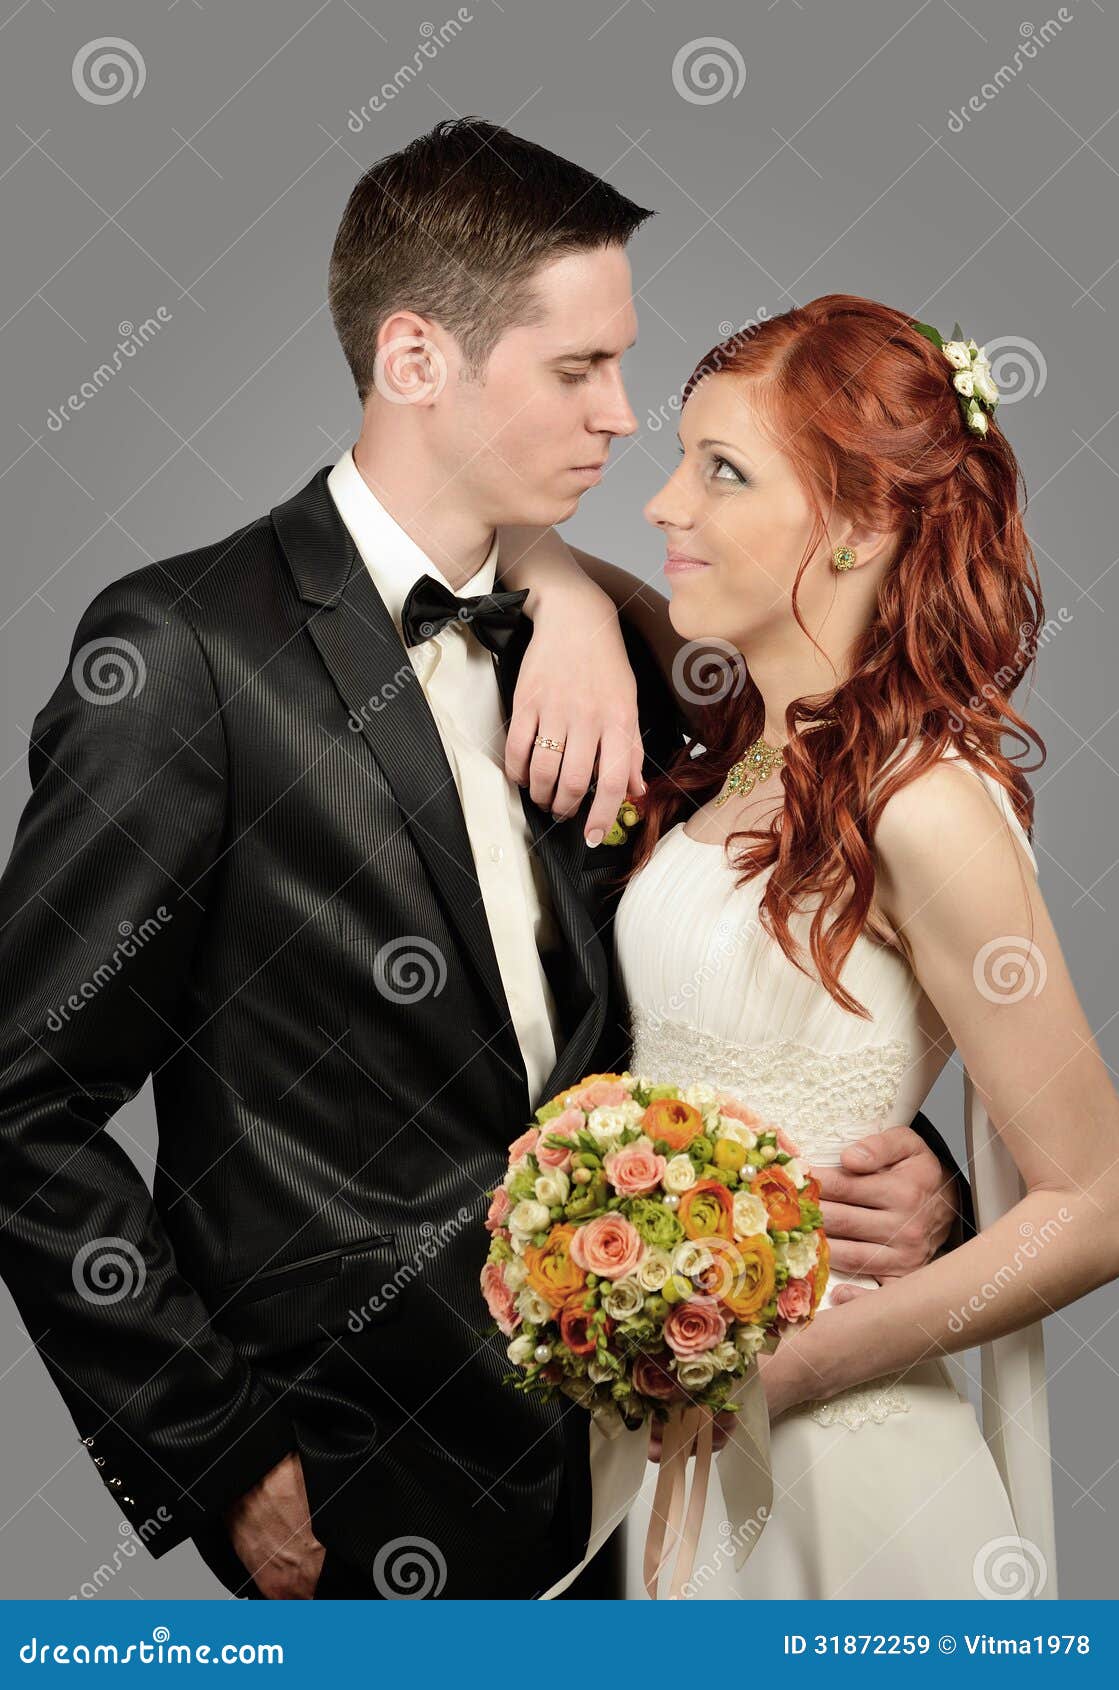 Close Up of a Nice Young Wedding Couple Stock Image - Image of match, male:  31872259